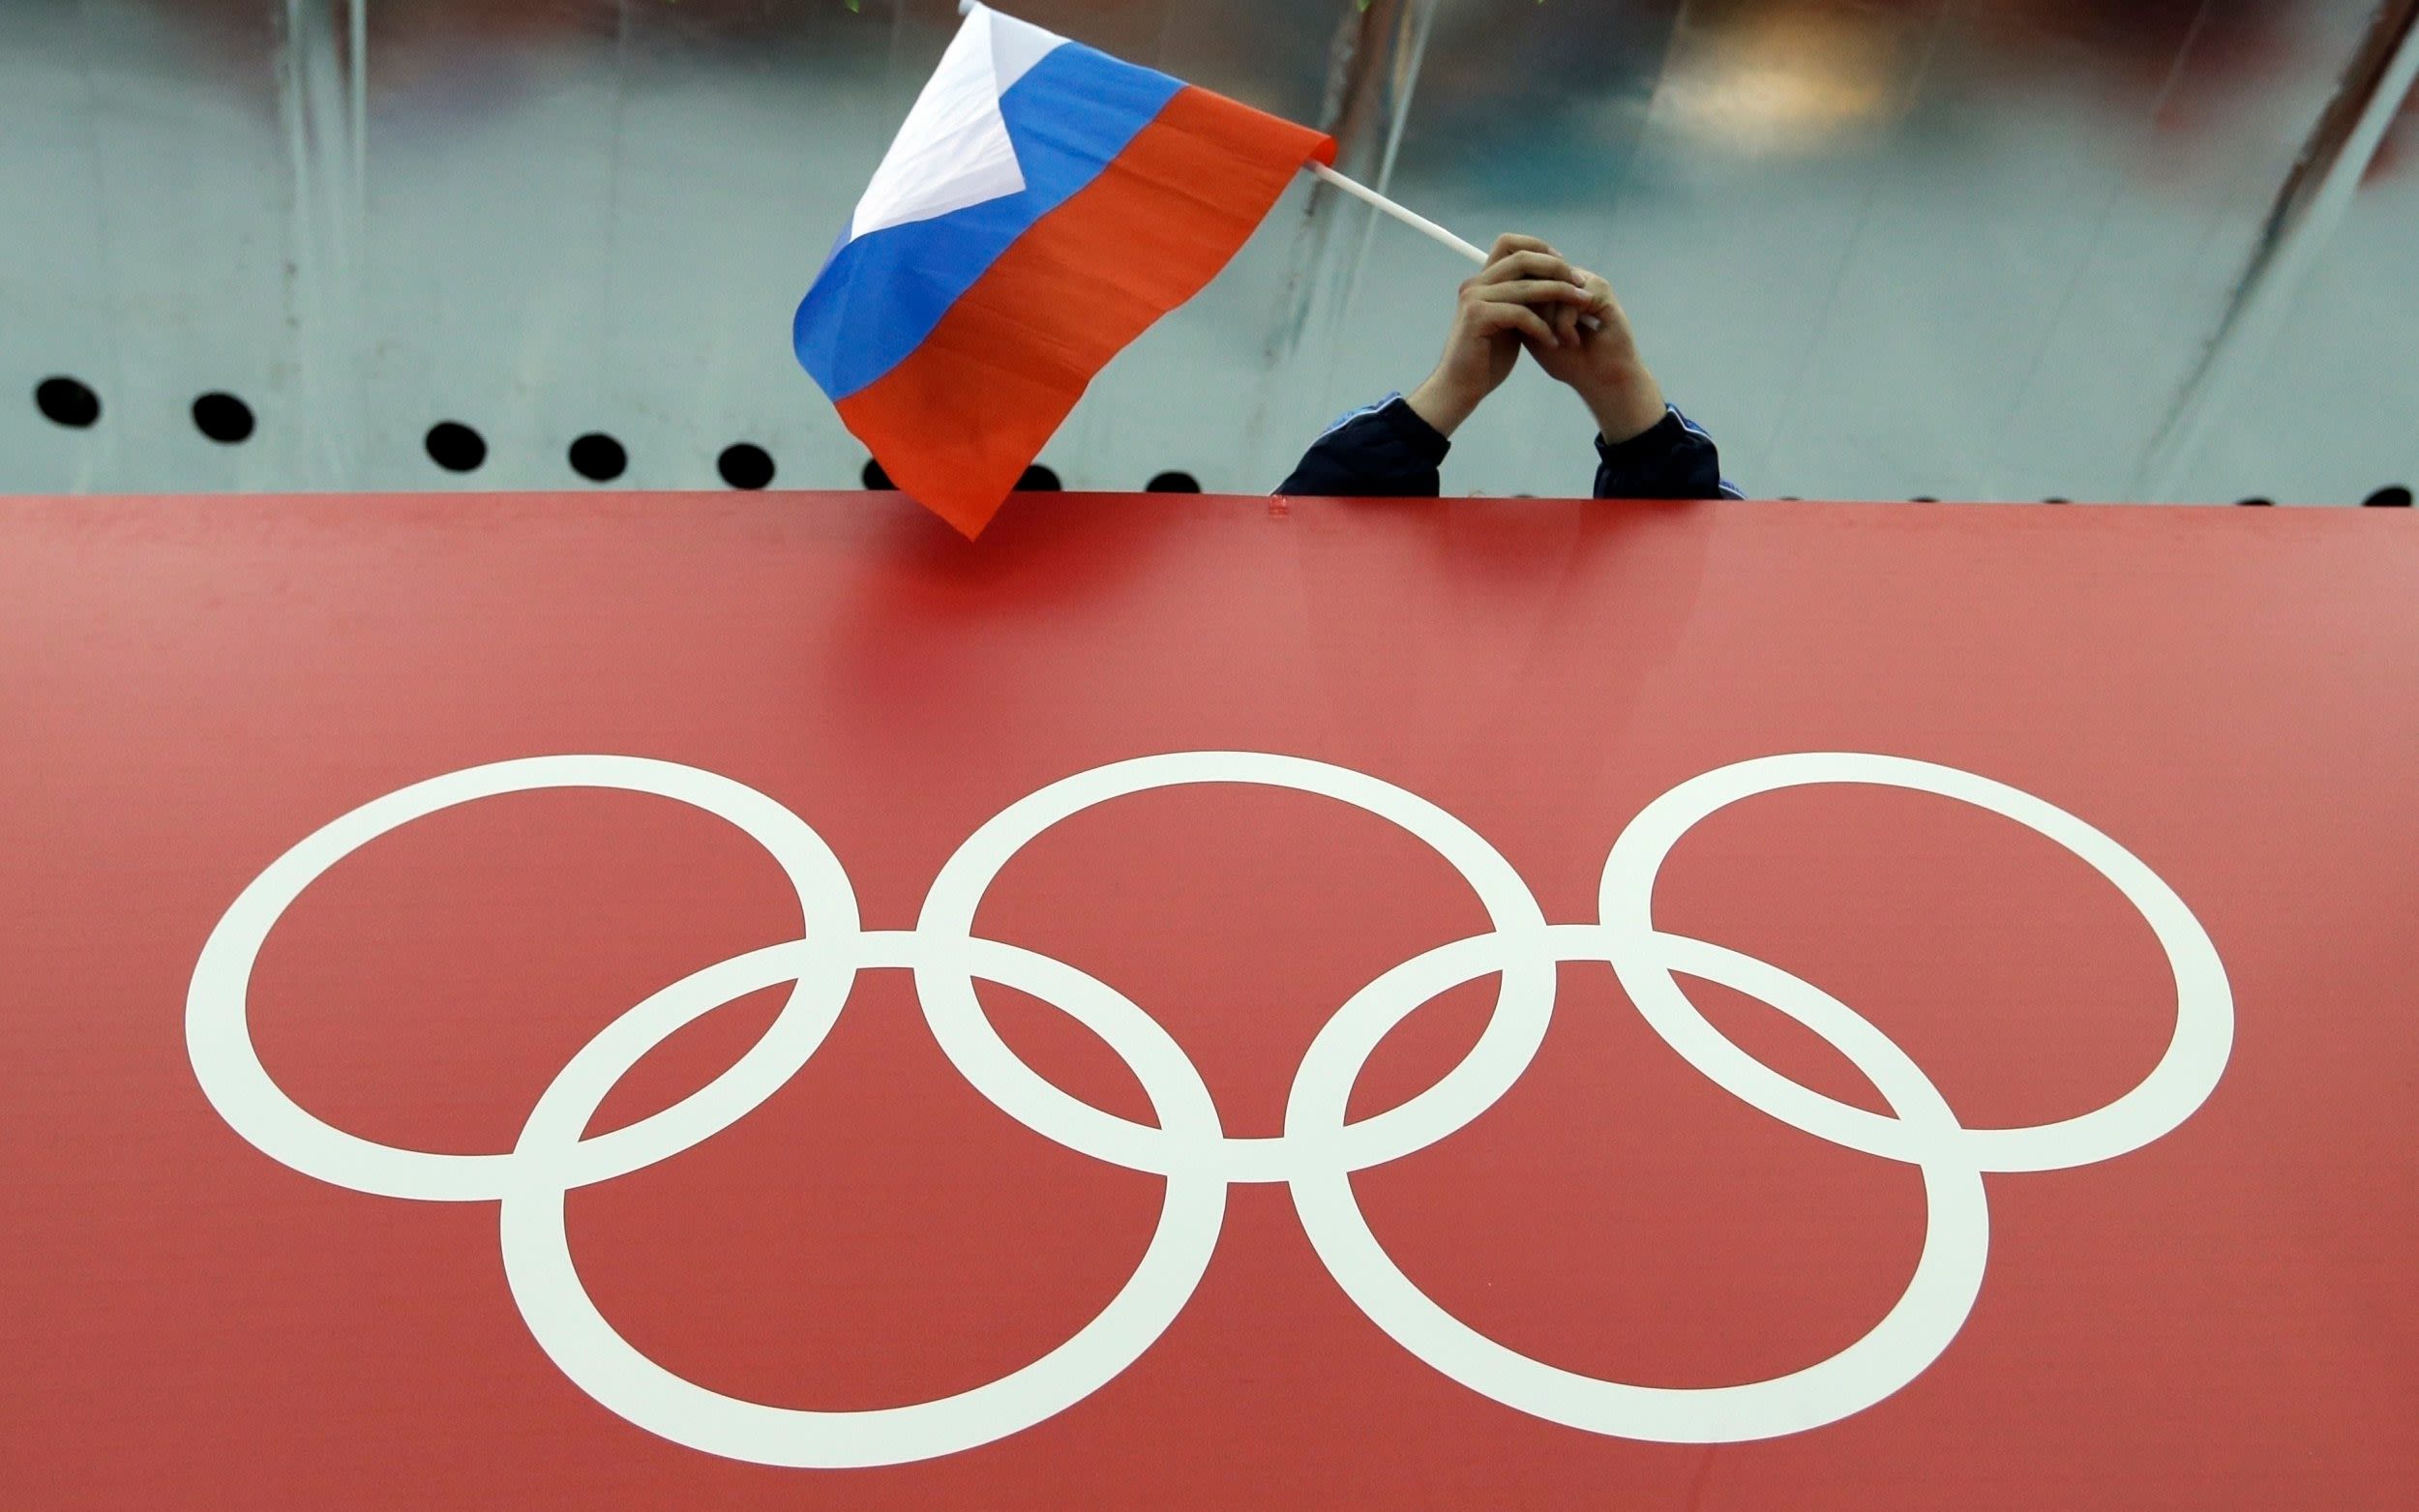 Is Russia at the Olympics and what is ‘AIN’?